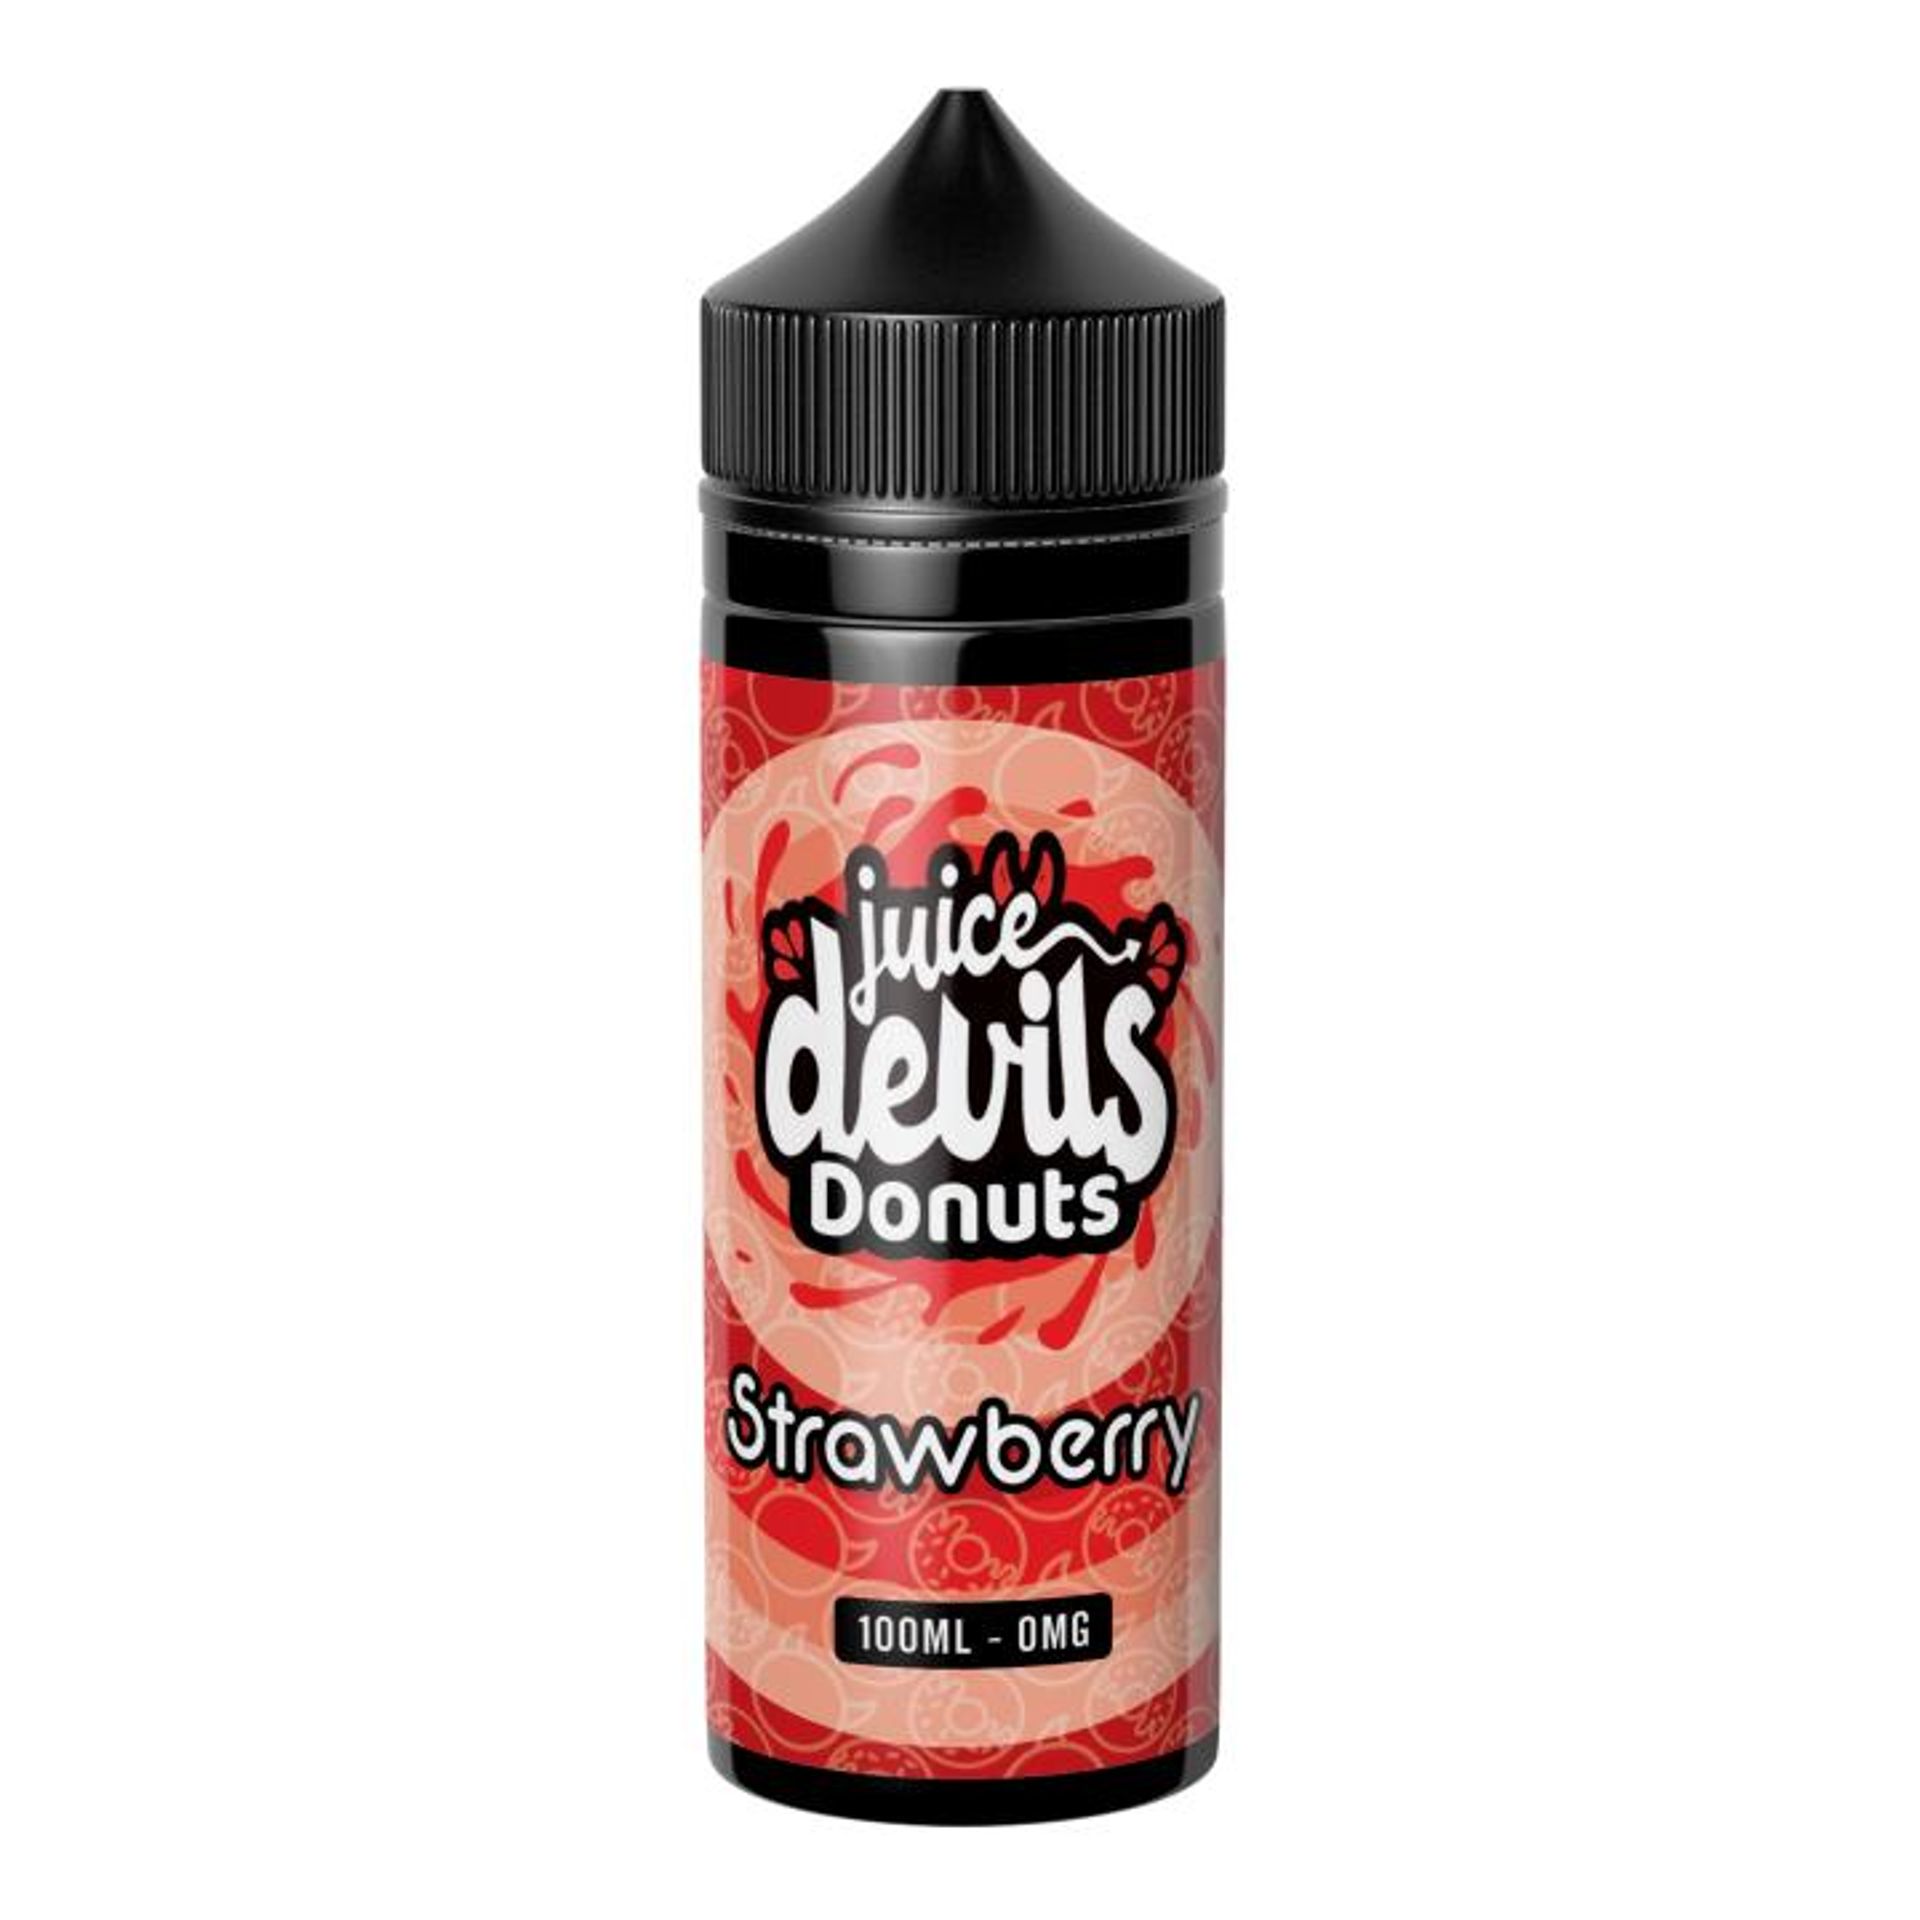 Image of Strawberry Donut by Juice Devils